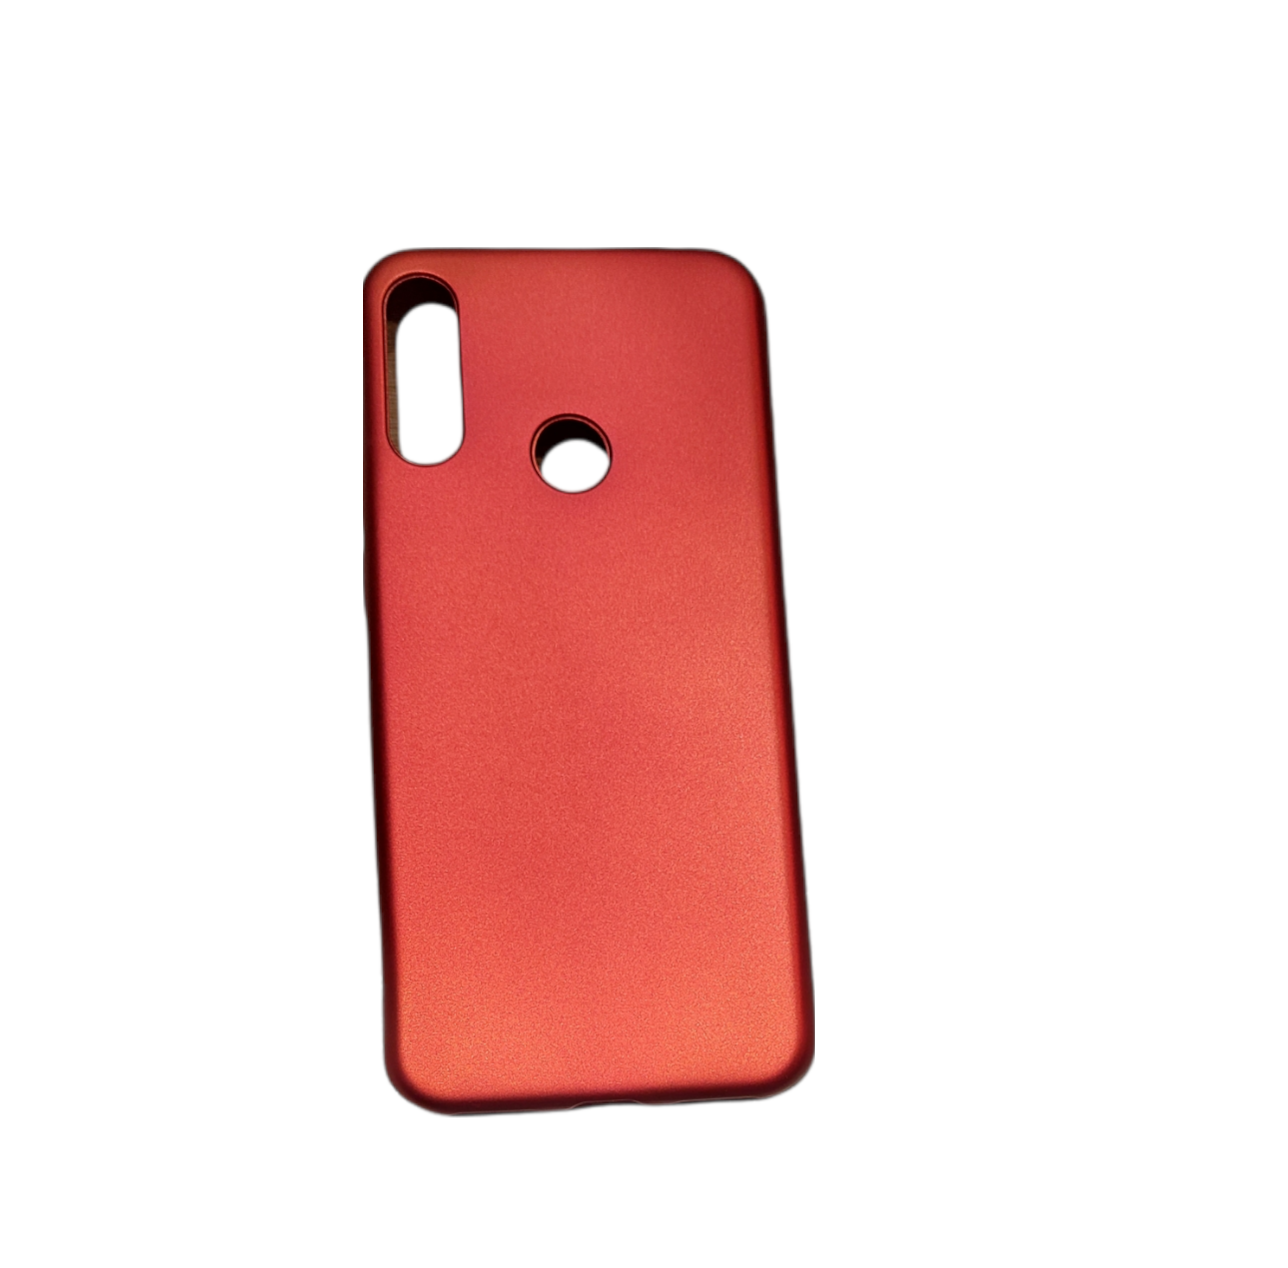 Silicone case for Huawei Y6 2019 in red